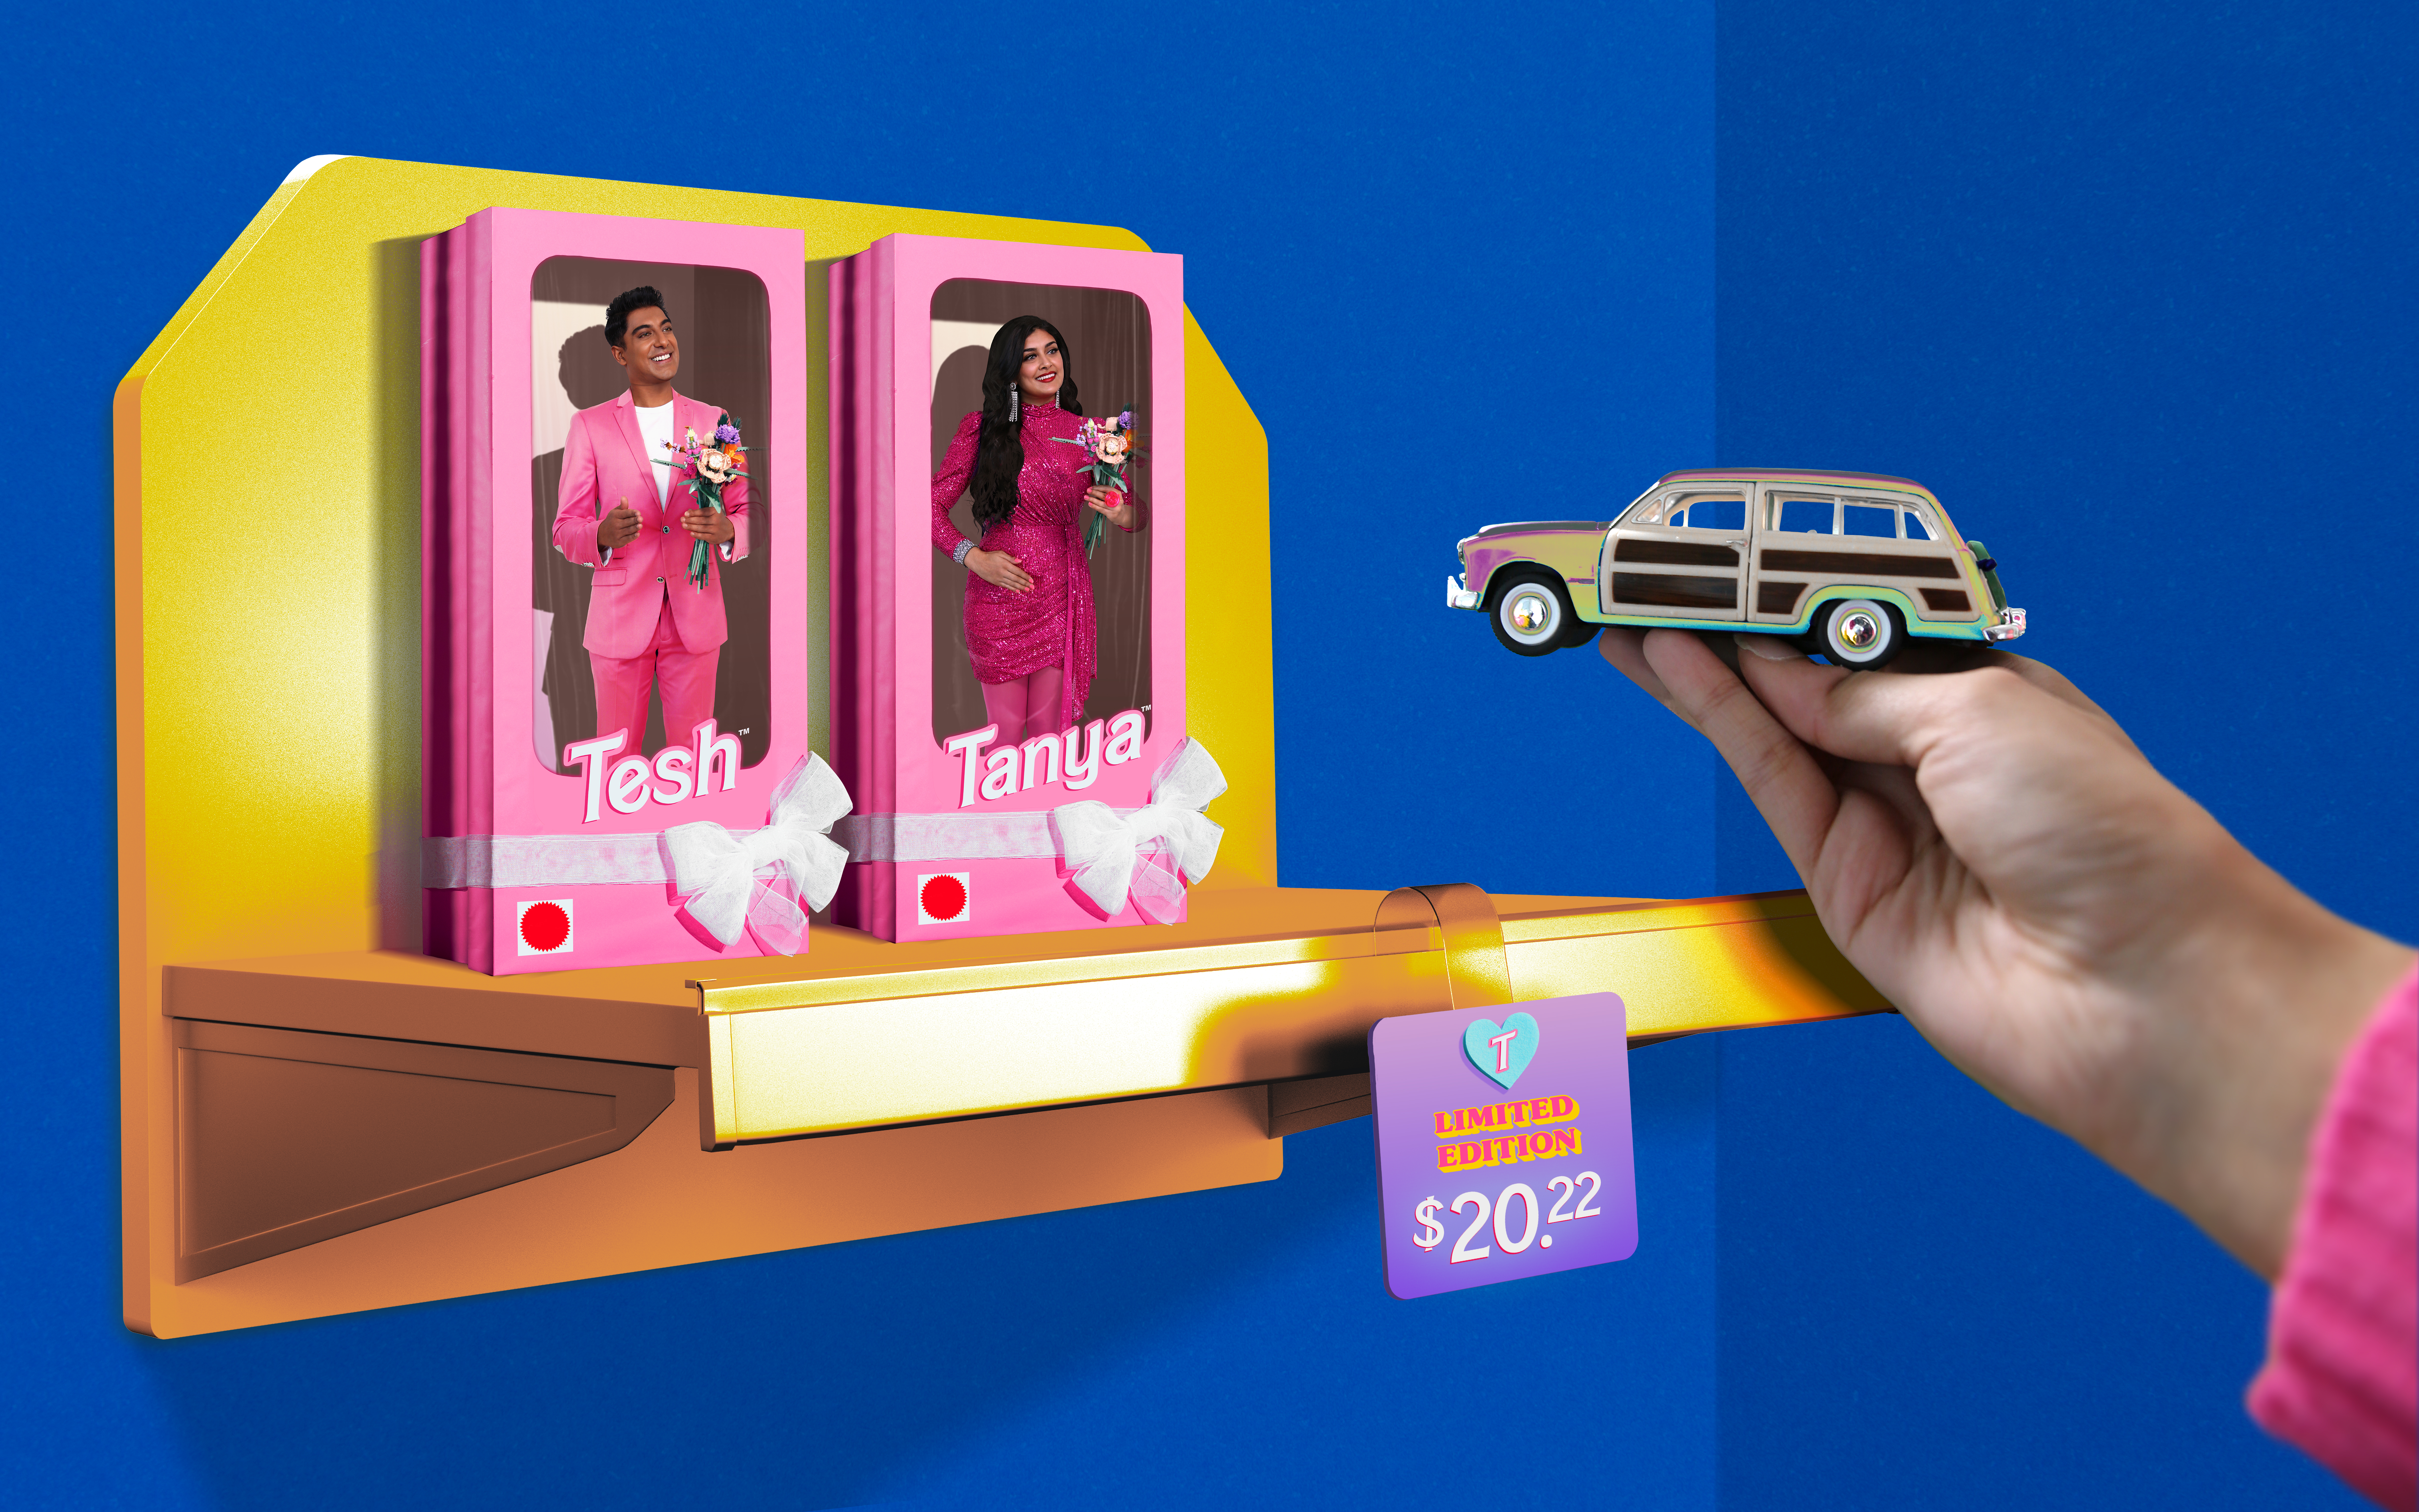 Tesh and Tanya Ken and Barbie dolls in individual boxes on top of a display ledge. A hand holds a small car and a limited edition price tag reads, “$20.22.”